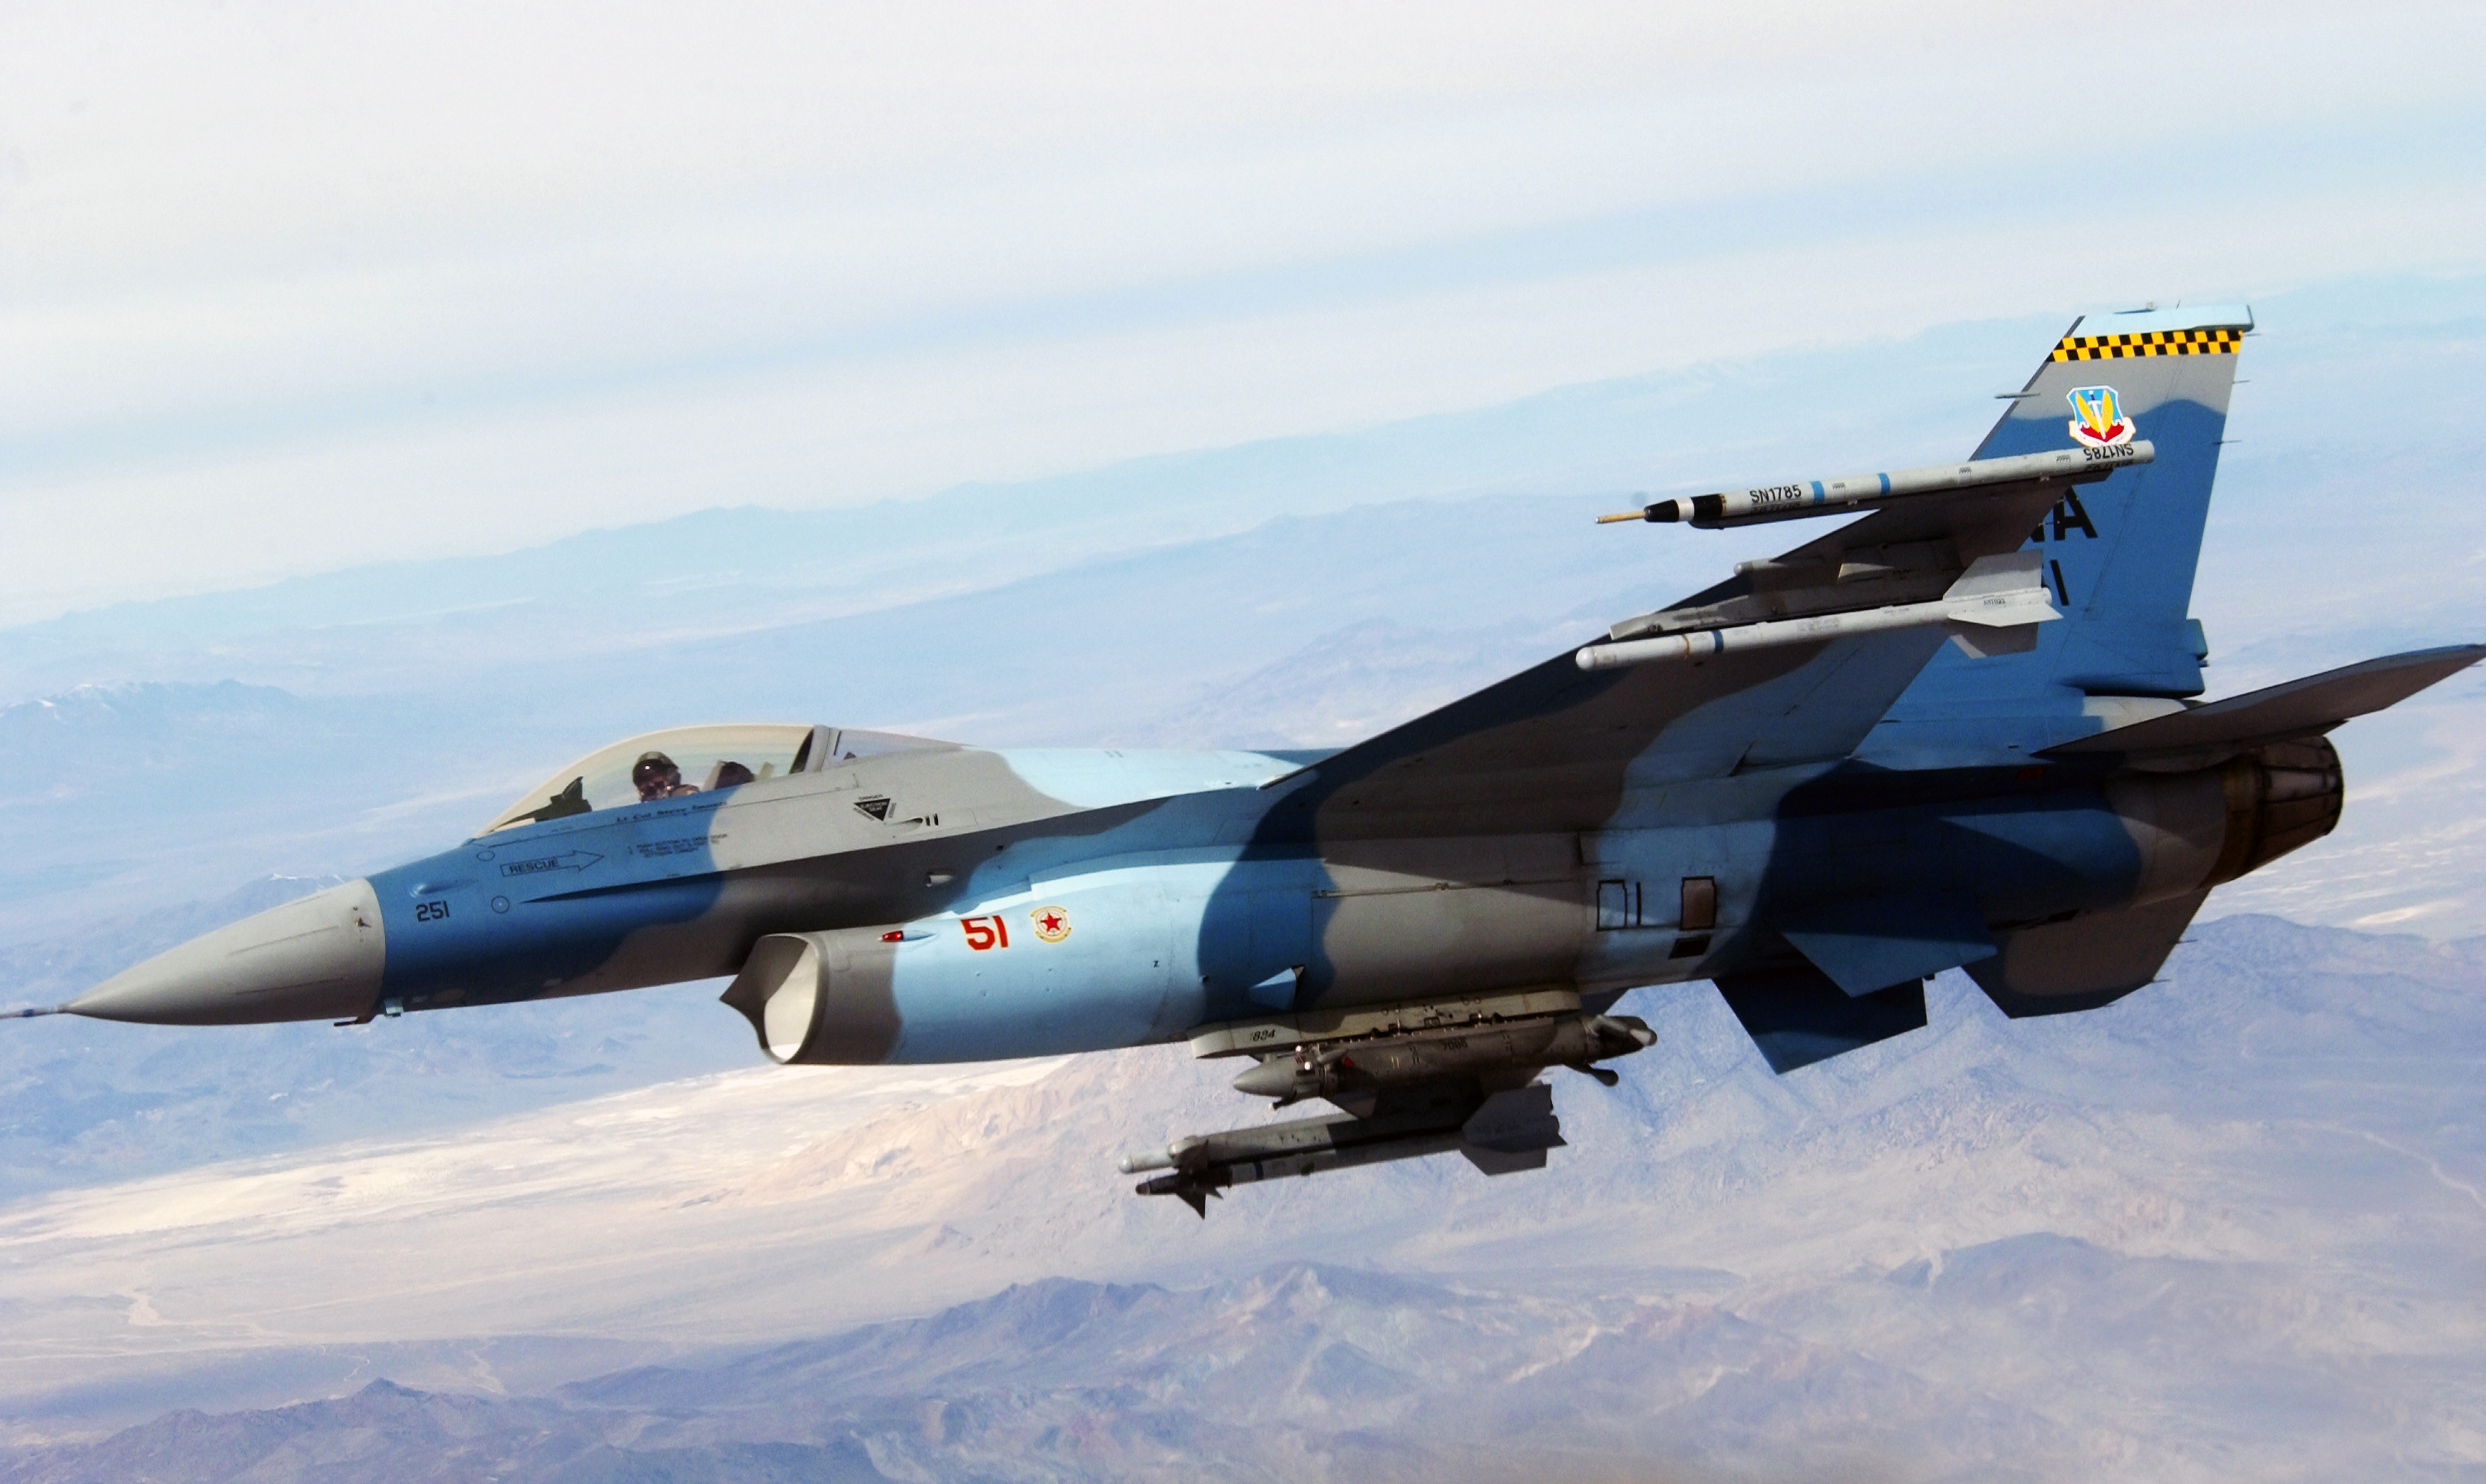 General Dynamics F-16 Fighting Falcon Backgrounds, Compatible - PC, Mobile, Gadgets| 3008x1796 px